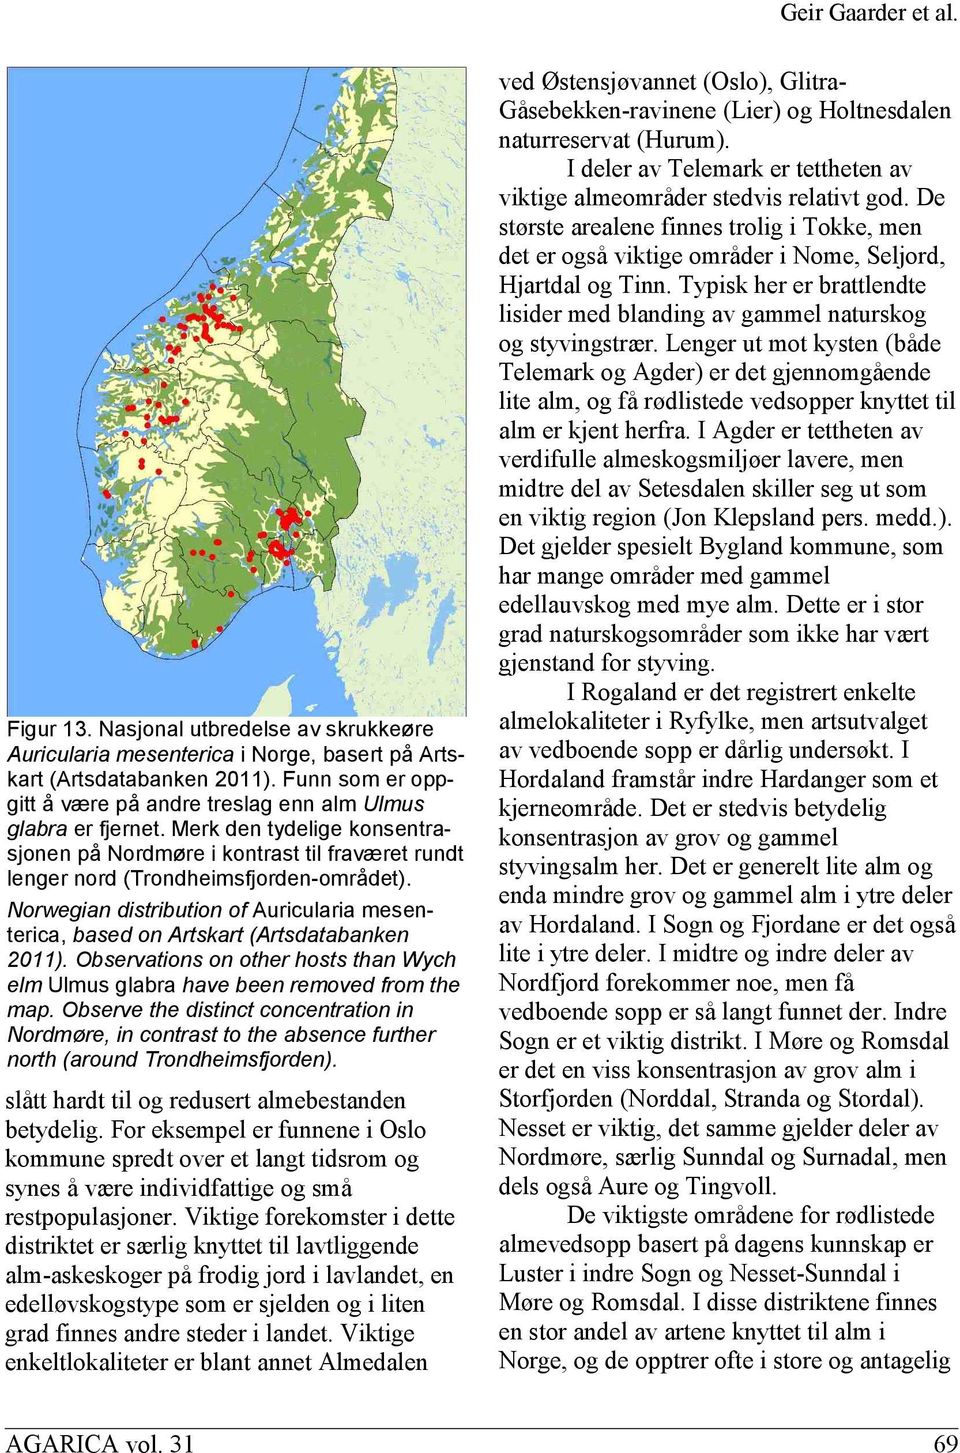 Norwegian distribution of Auricularia mesenterica, based on Artskart (Artsdatabanken 2011). Observations on other hosts than Wych elm Ulmus glabra have been removed from the map.